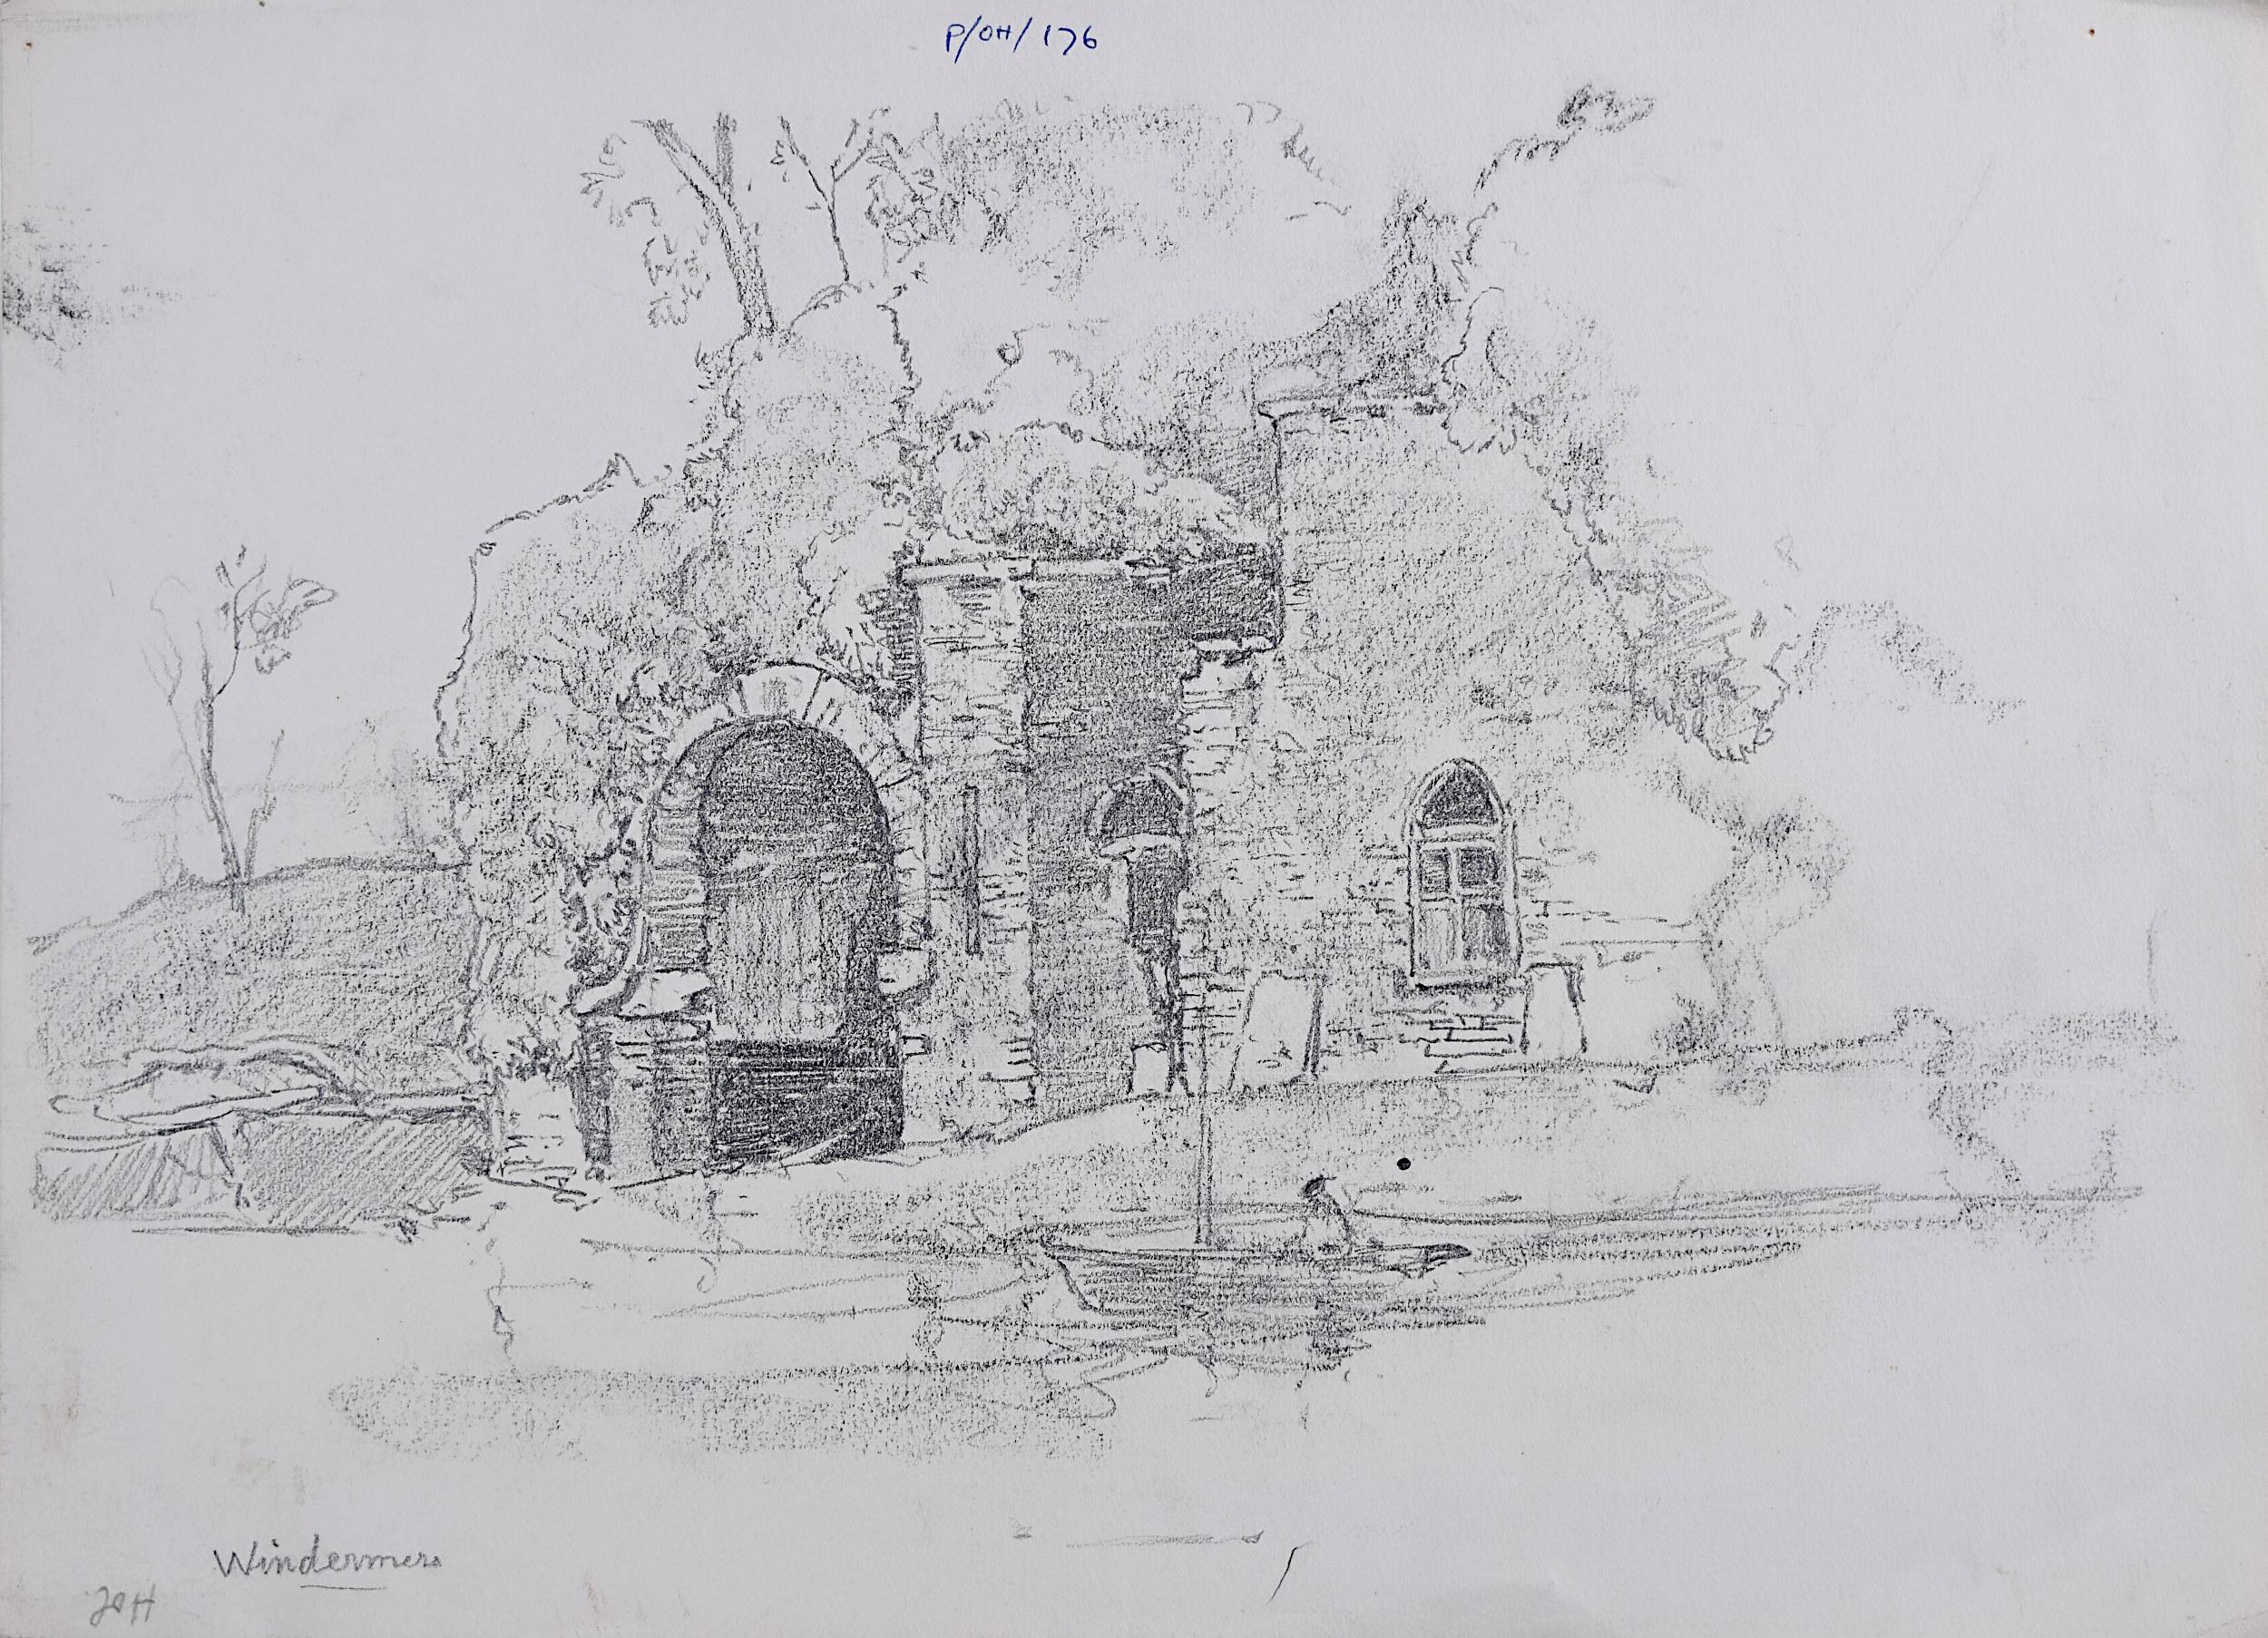 Landscape Art Oliver Hall, R.A., R.E., R.S.W. - Drawing Modern British Art Oliver Hall RA Boat House Windermere Lake District Drawing